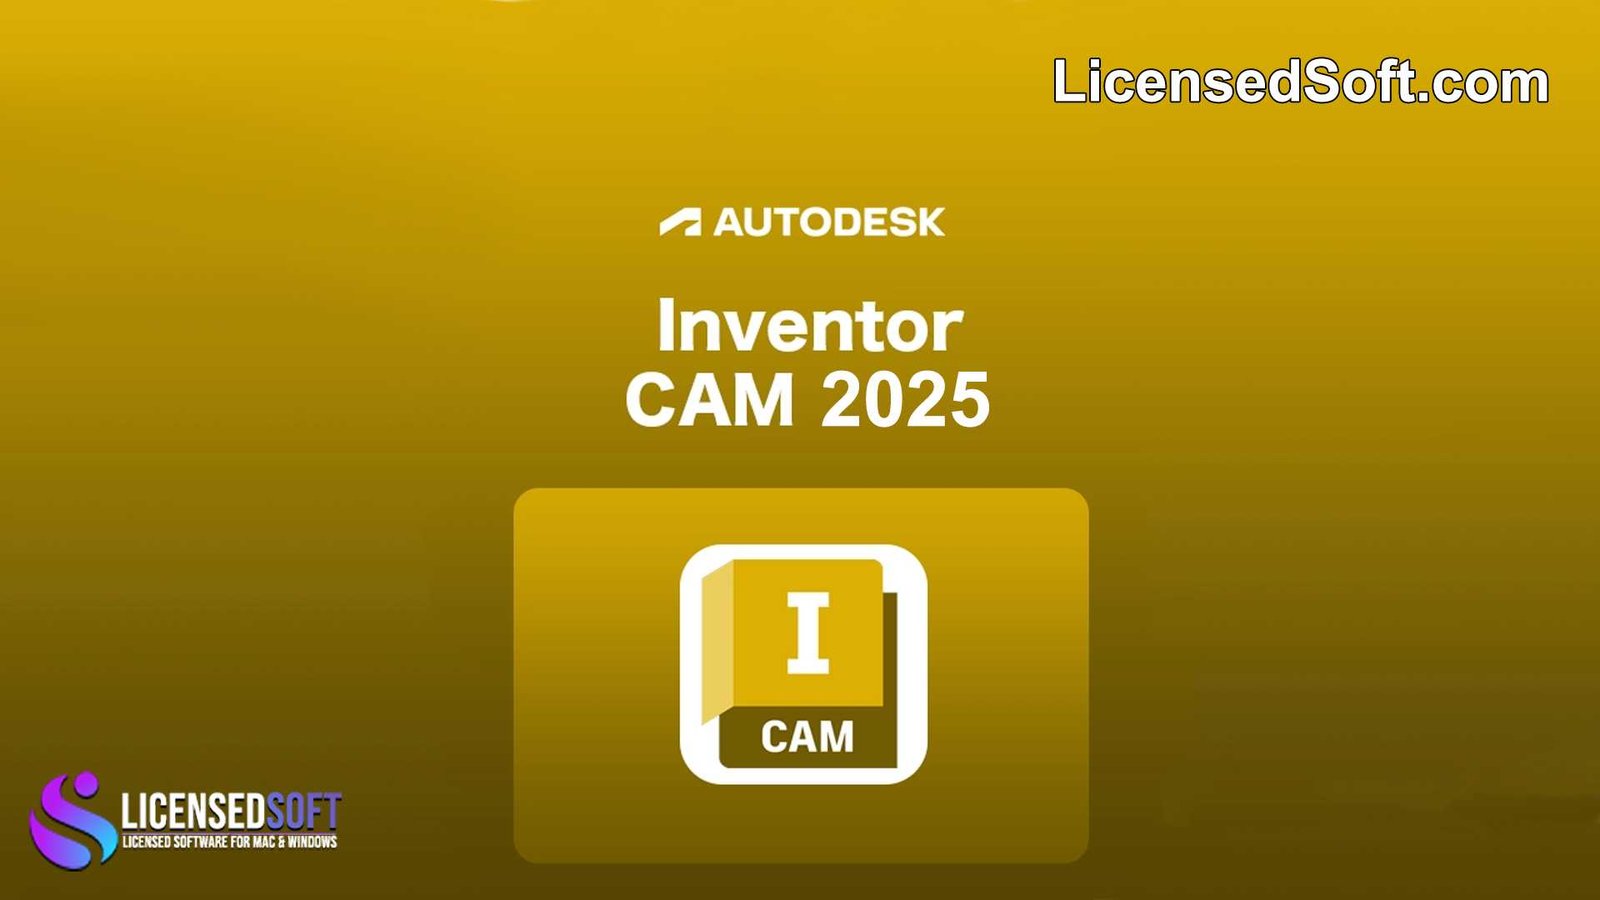 Autodesk InventorCAM Ultimate 2025 By LicensedSoft